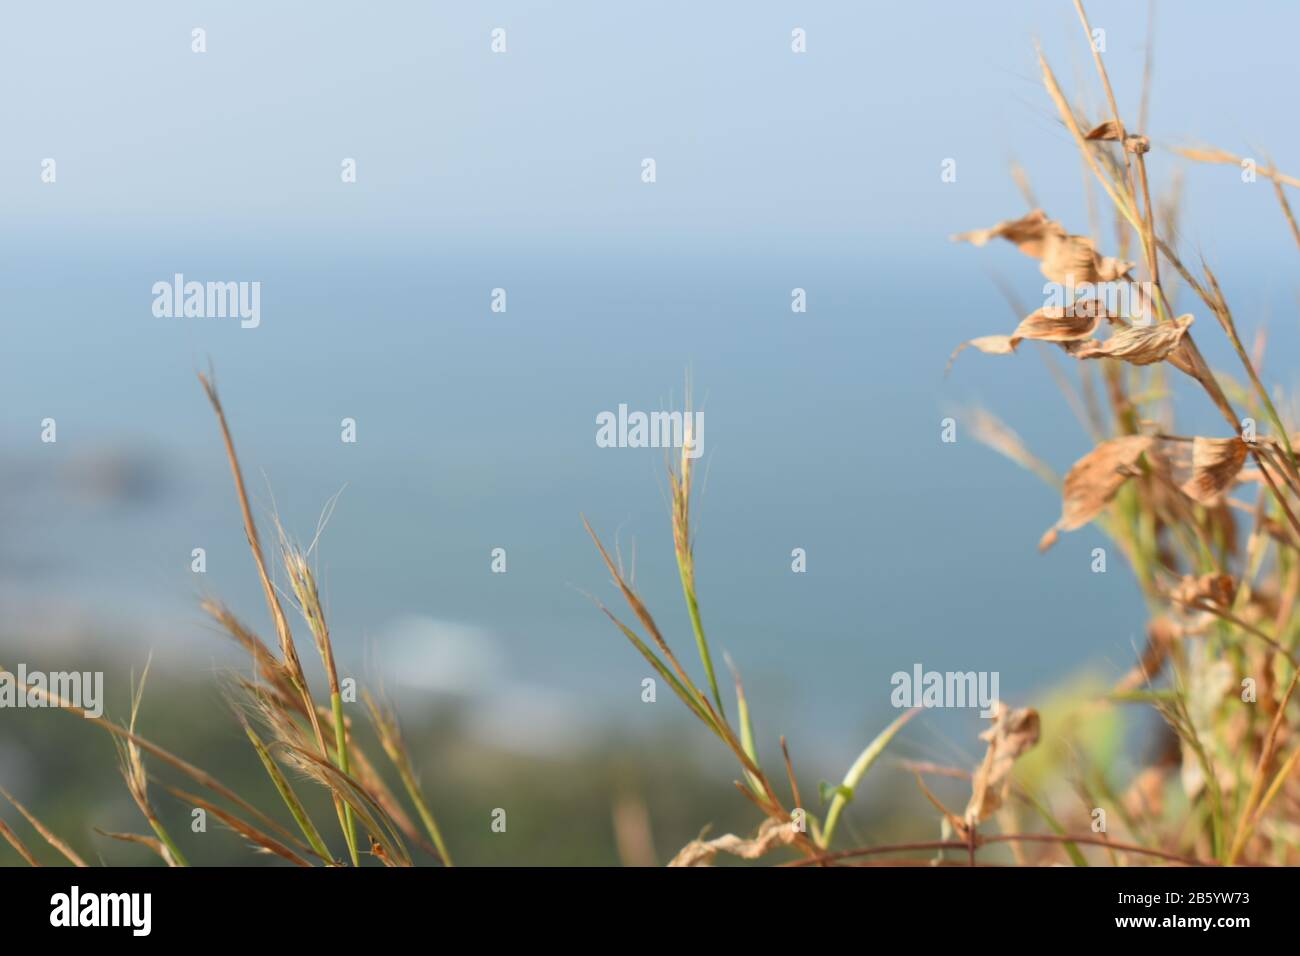 yellowish grass in the foreground just behind a ocean Stock Photo